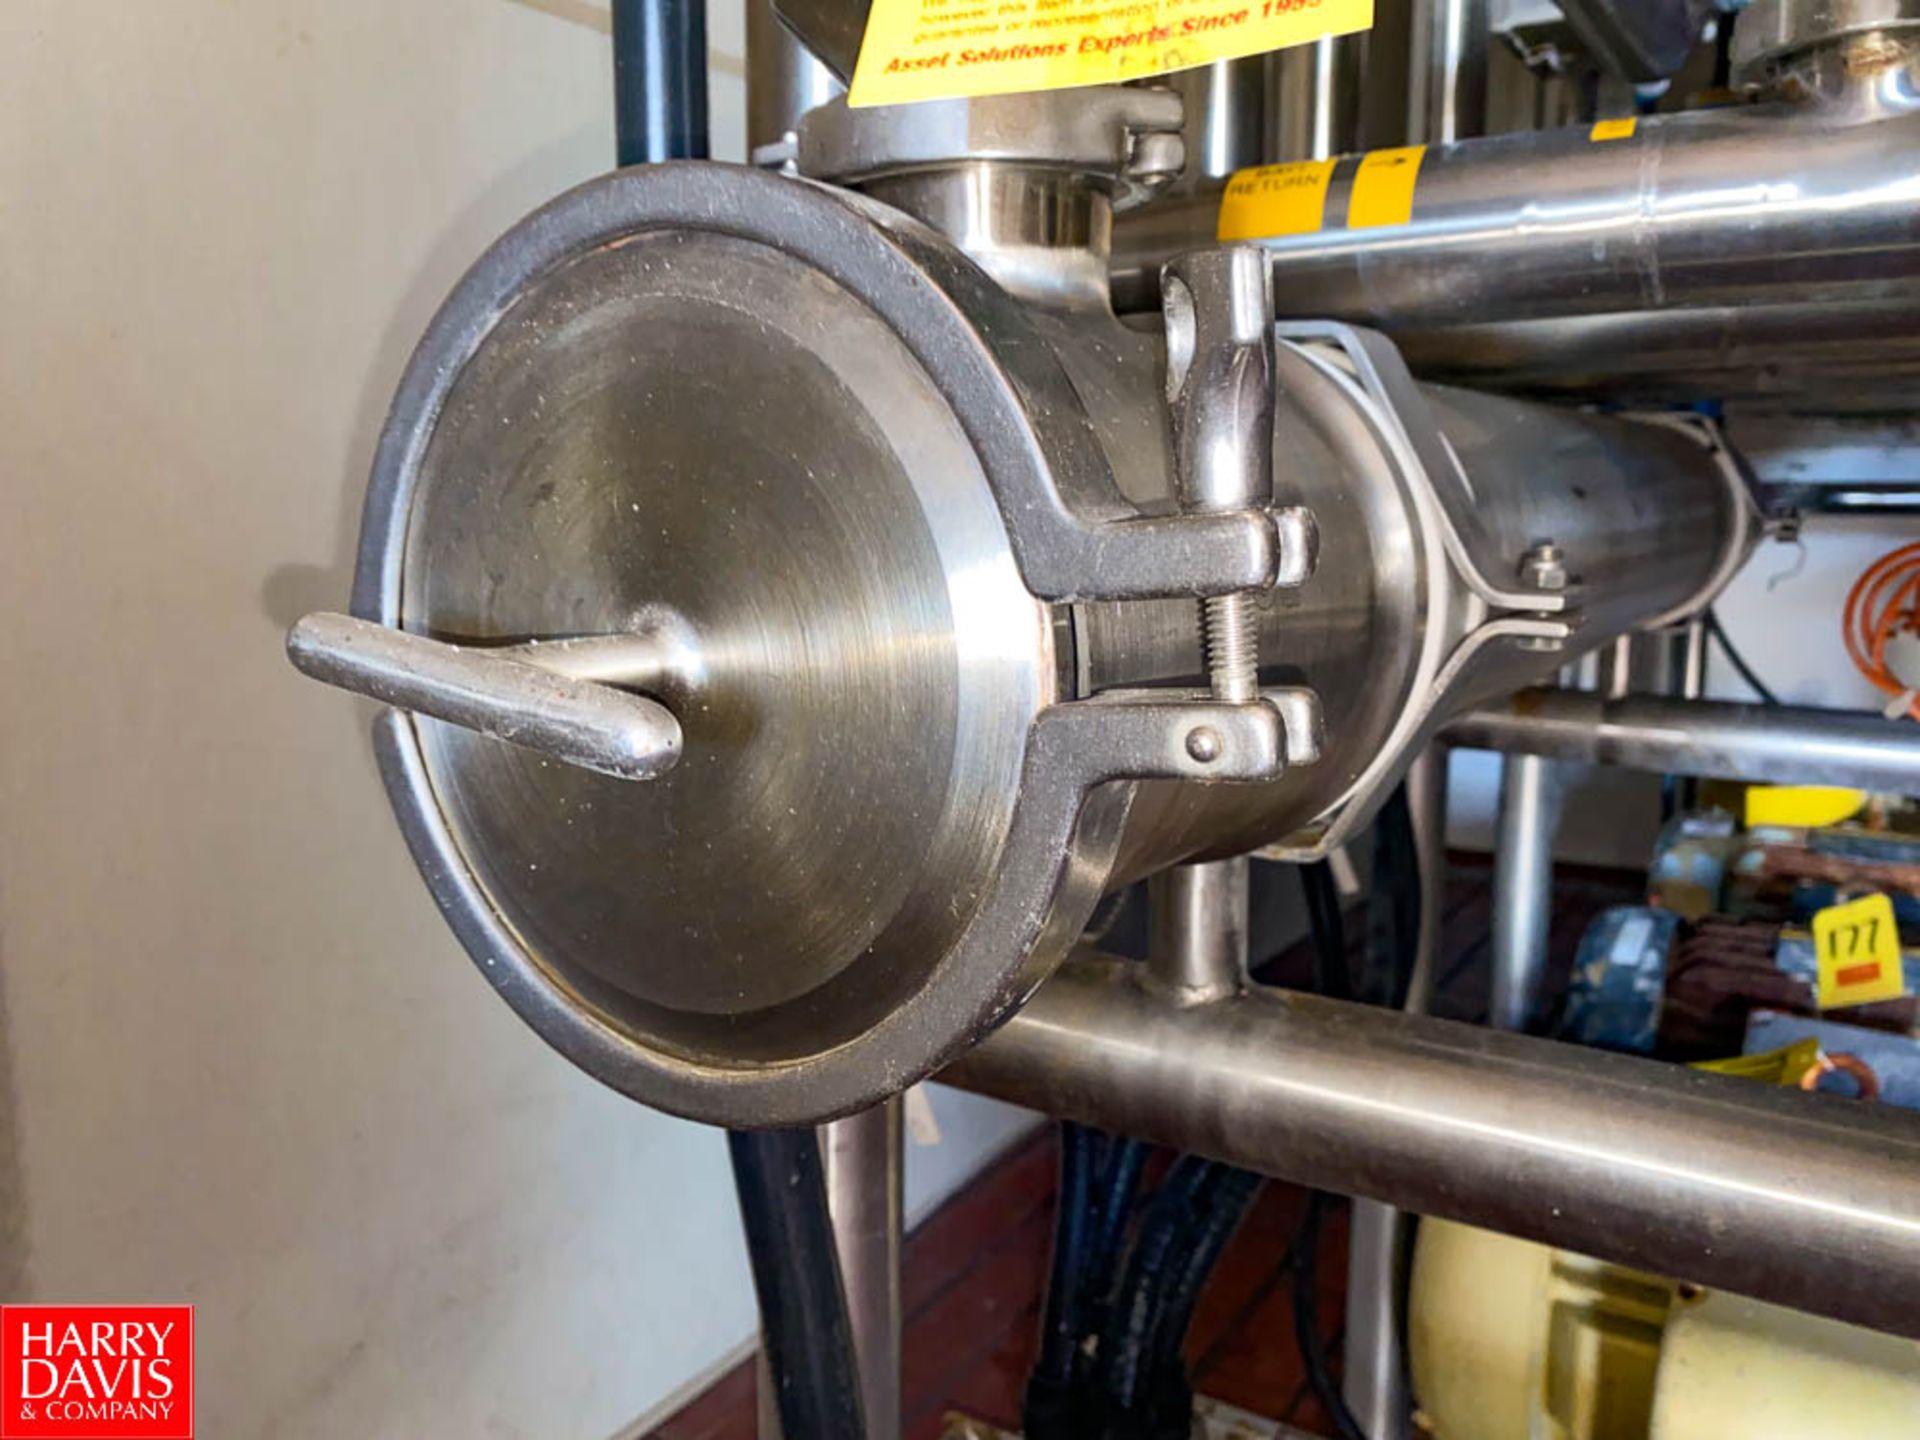 3" S/S Online Filter, with Spring Loaded Check Valve, Subject to Bulk Bid - Rigging Fee: $250